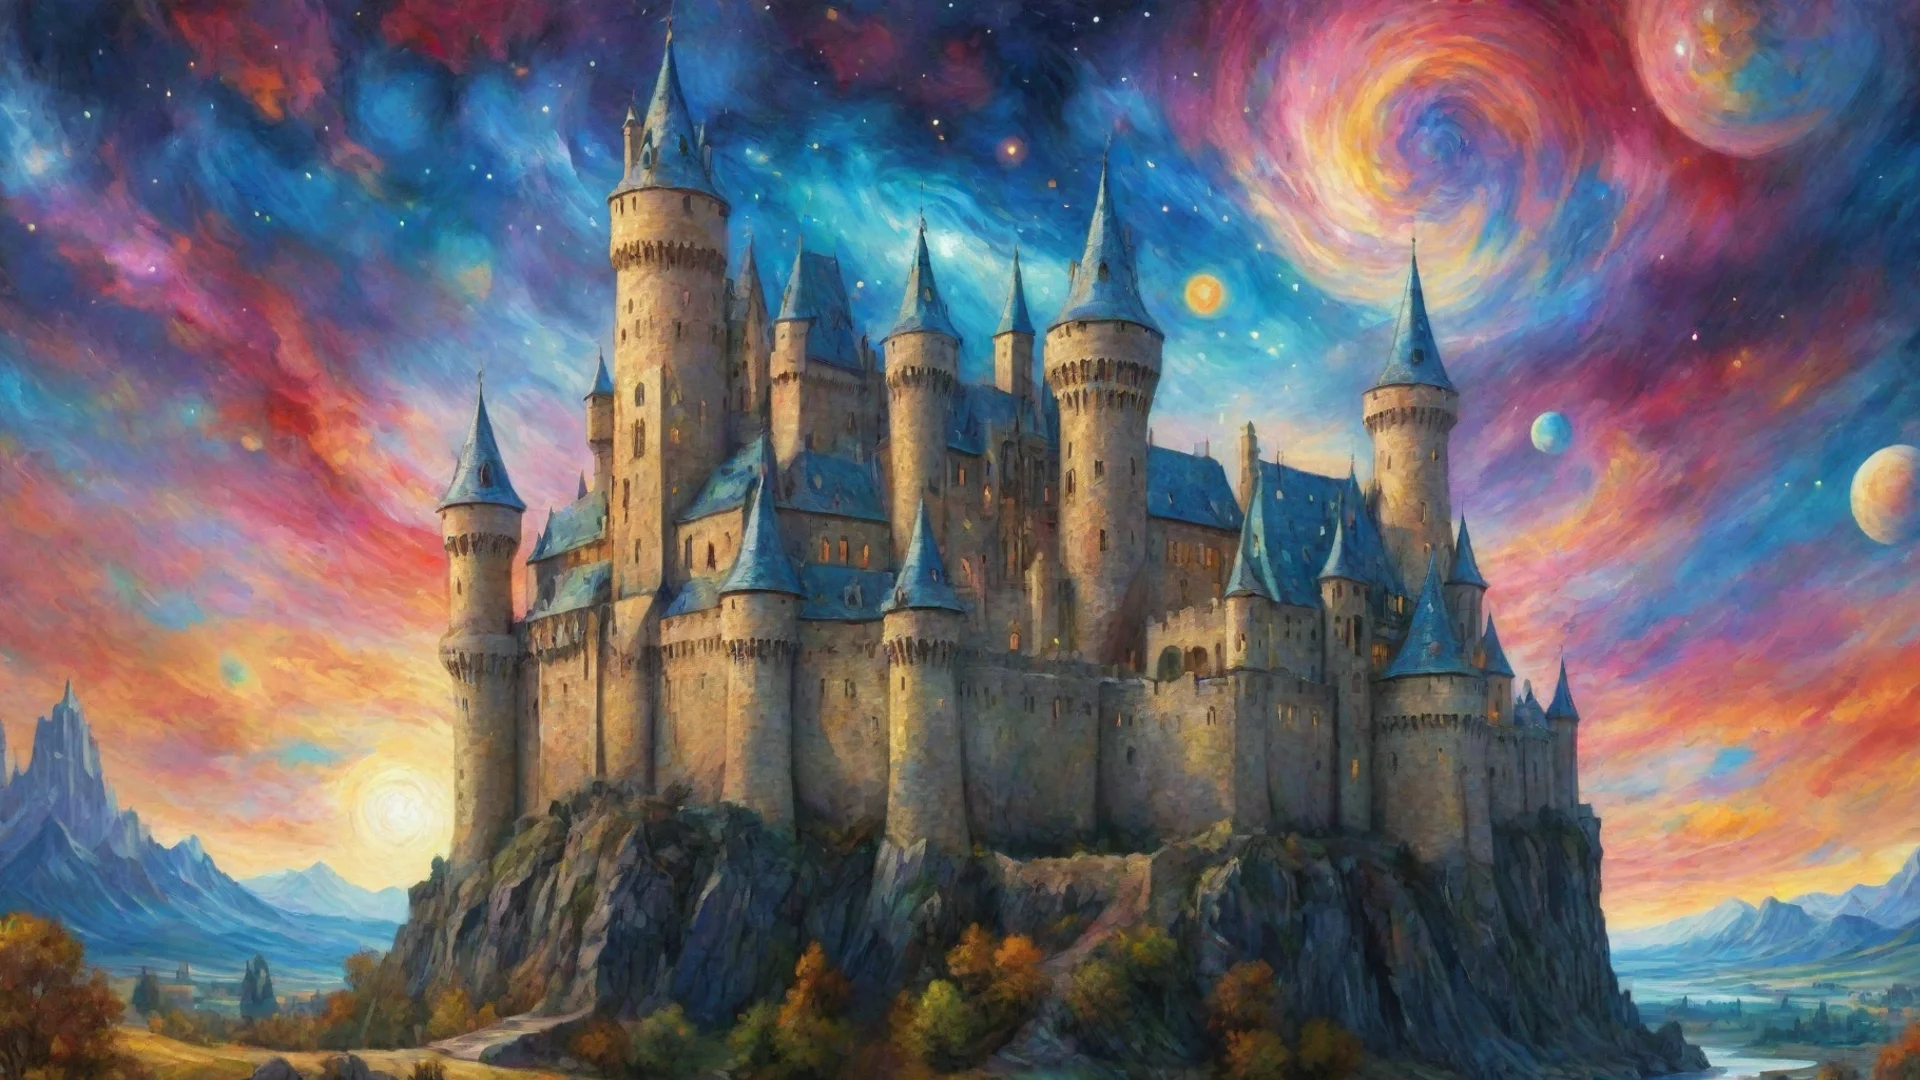 artstation art epic castle with colorful artistic sky planets van gogh style detailed hd asthetic castle confident engaging wow 3 wide